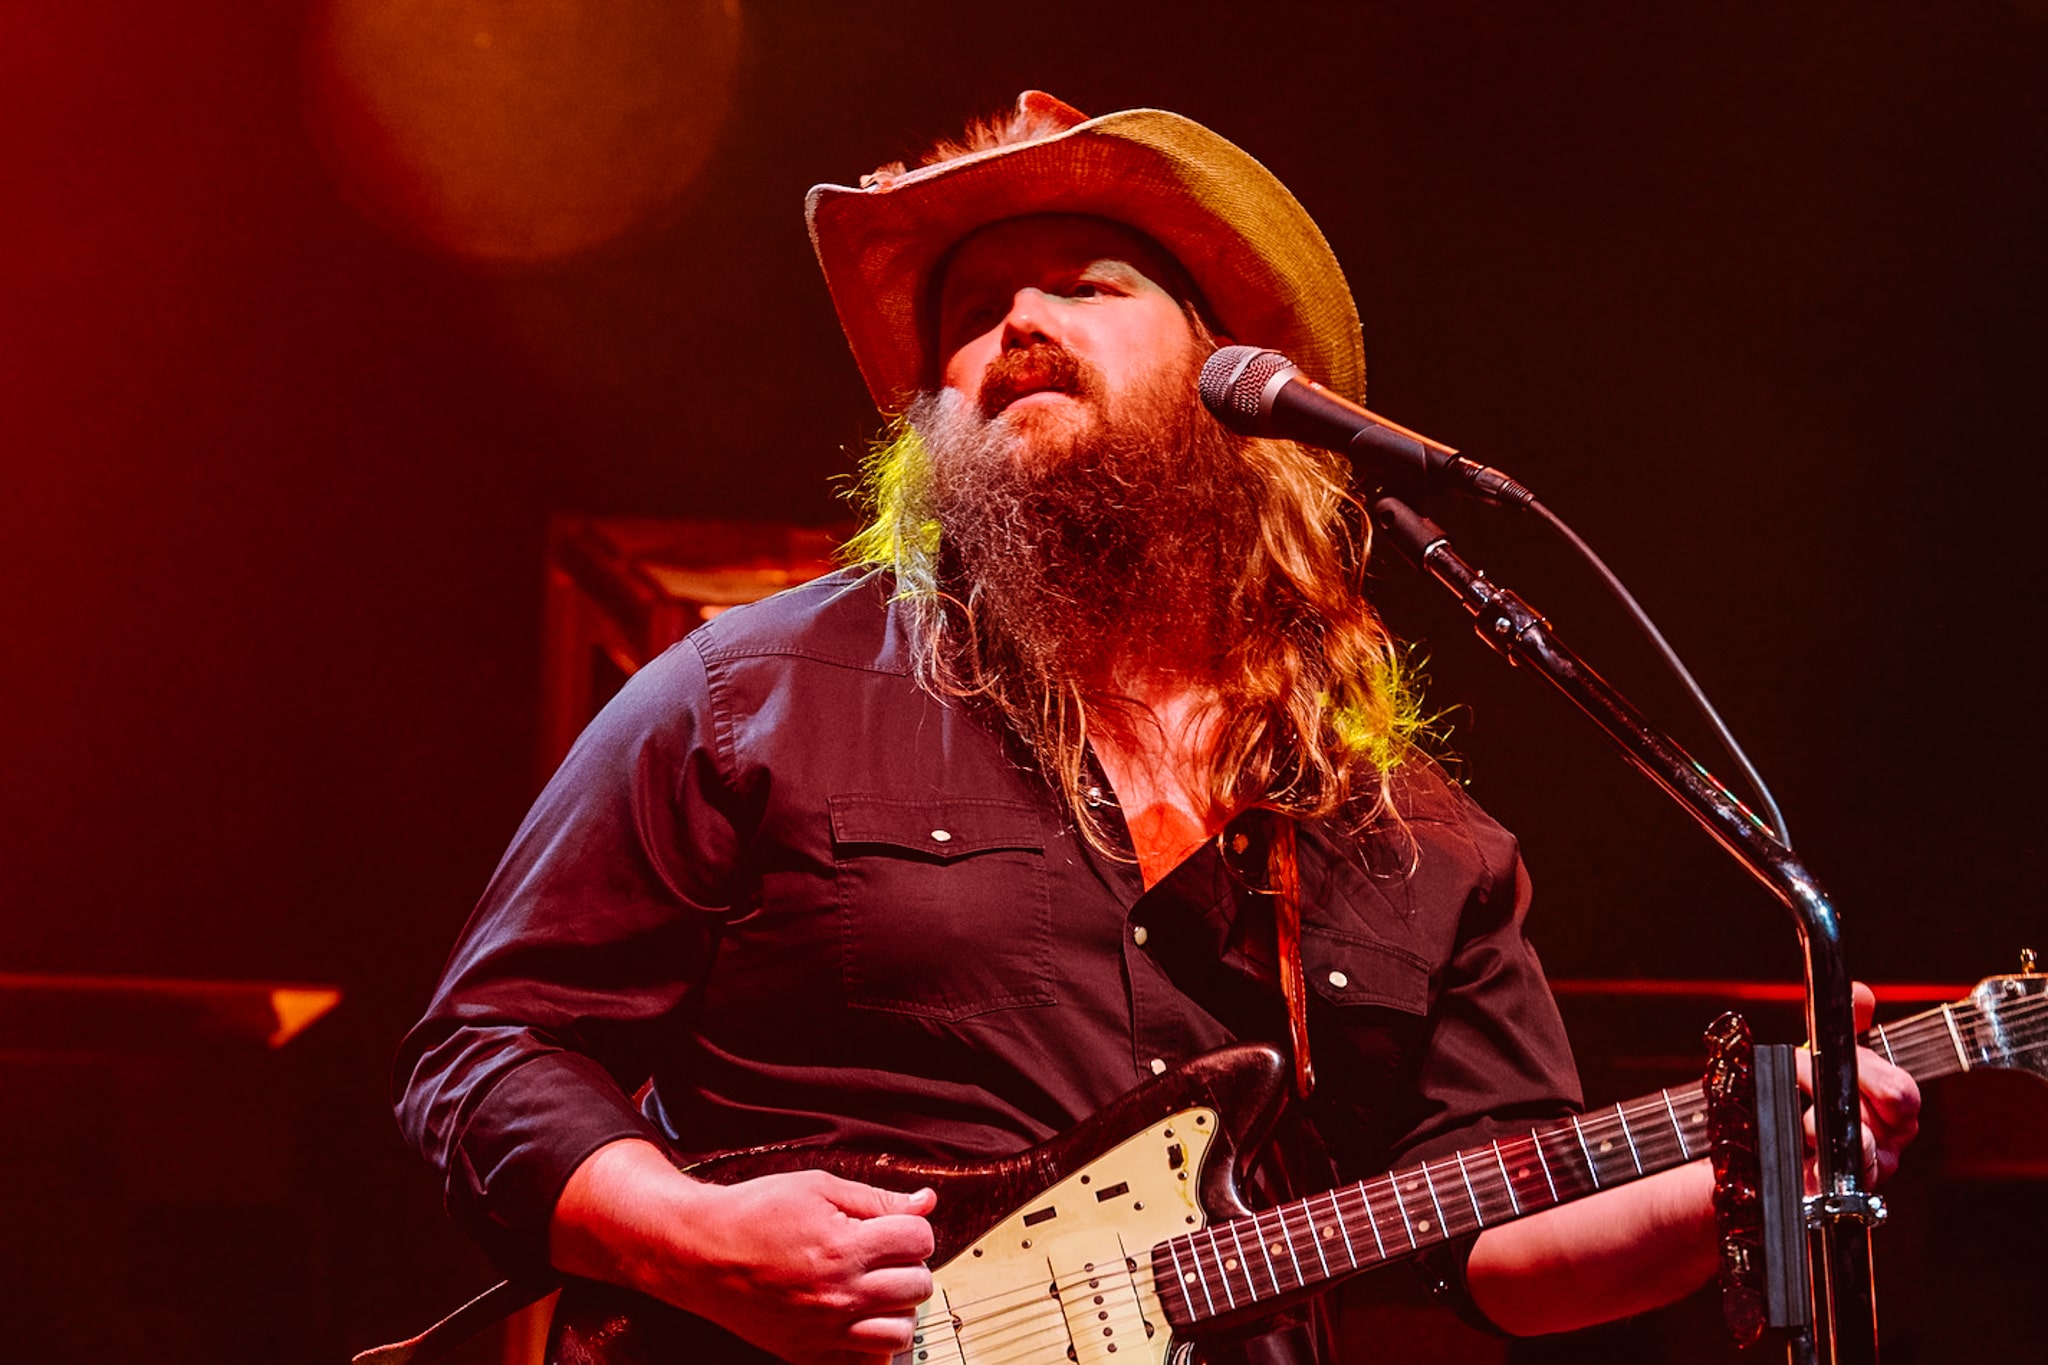 CMA Awards Nominees Include Chris Stapleton, Kacey Musgraves